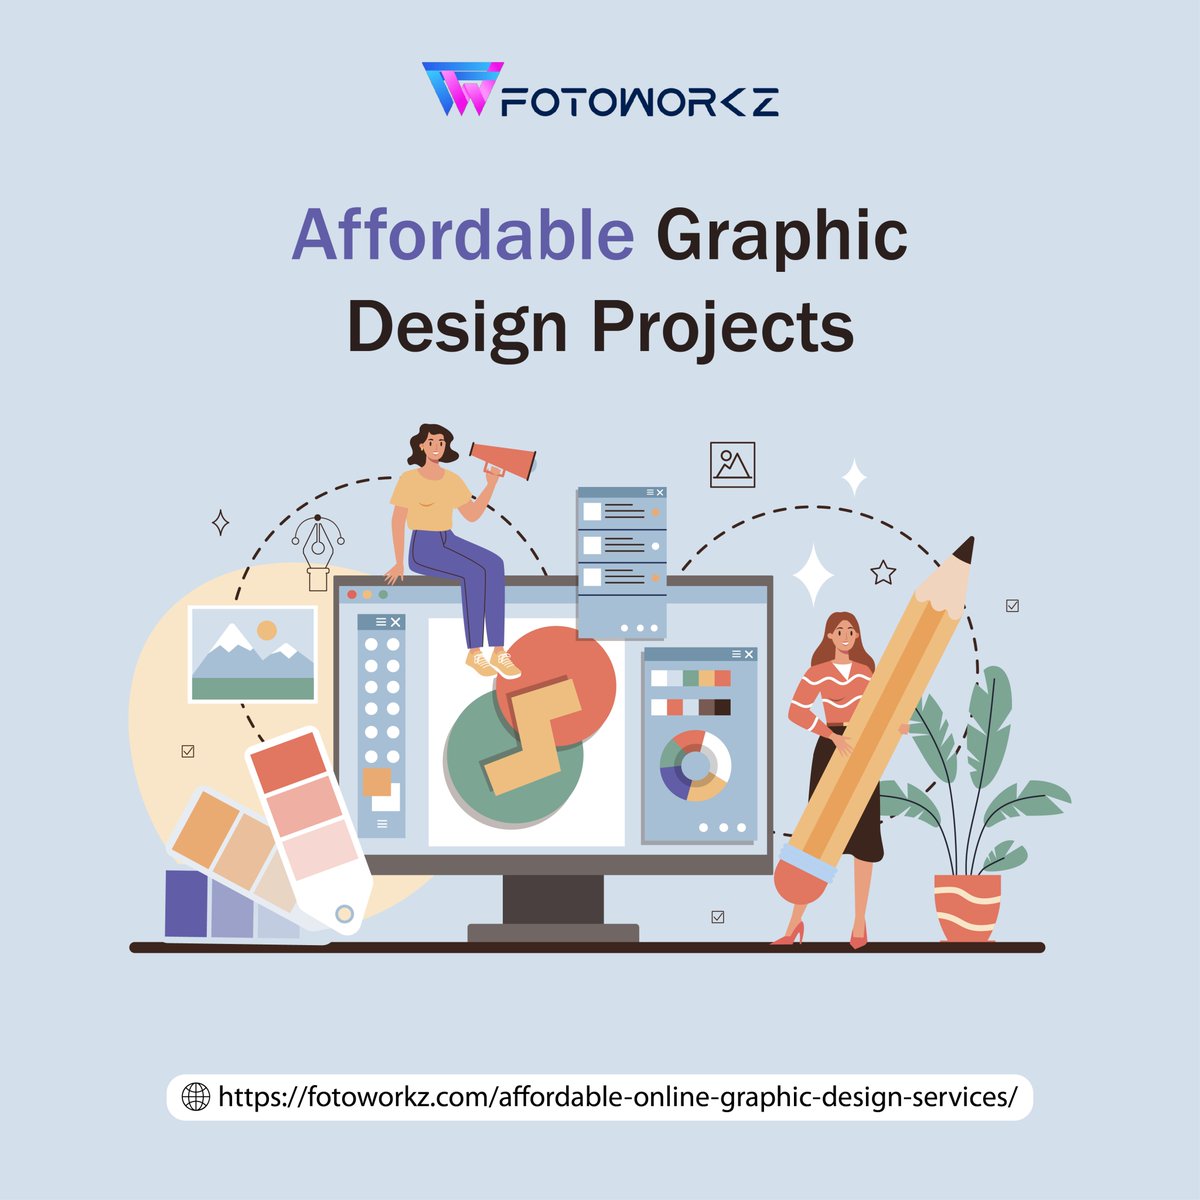 🎨 Looking for cost-effective graphic design services? Look no further! Our team specializes in Affordable Graphic Design Projects that won't break the bank. tinyurl.com/mr3ua3ut #GraphicDesign #AffordableDesign #CreativeSolutions #OnlineDesign #Fotoworkz